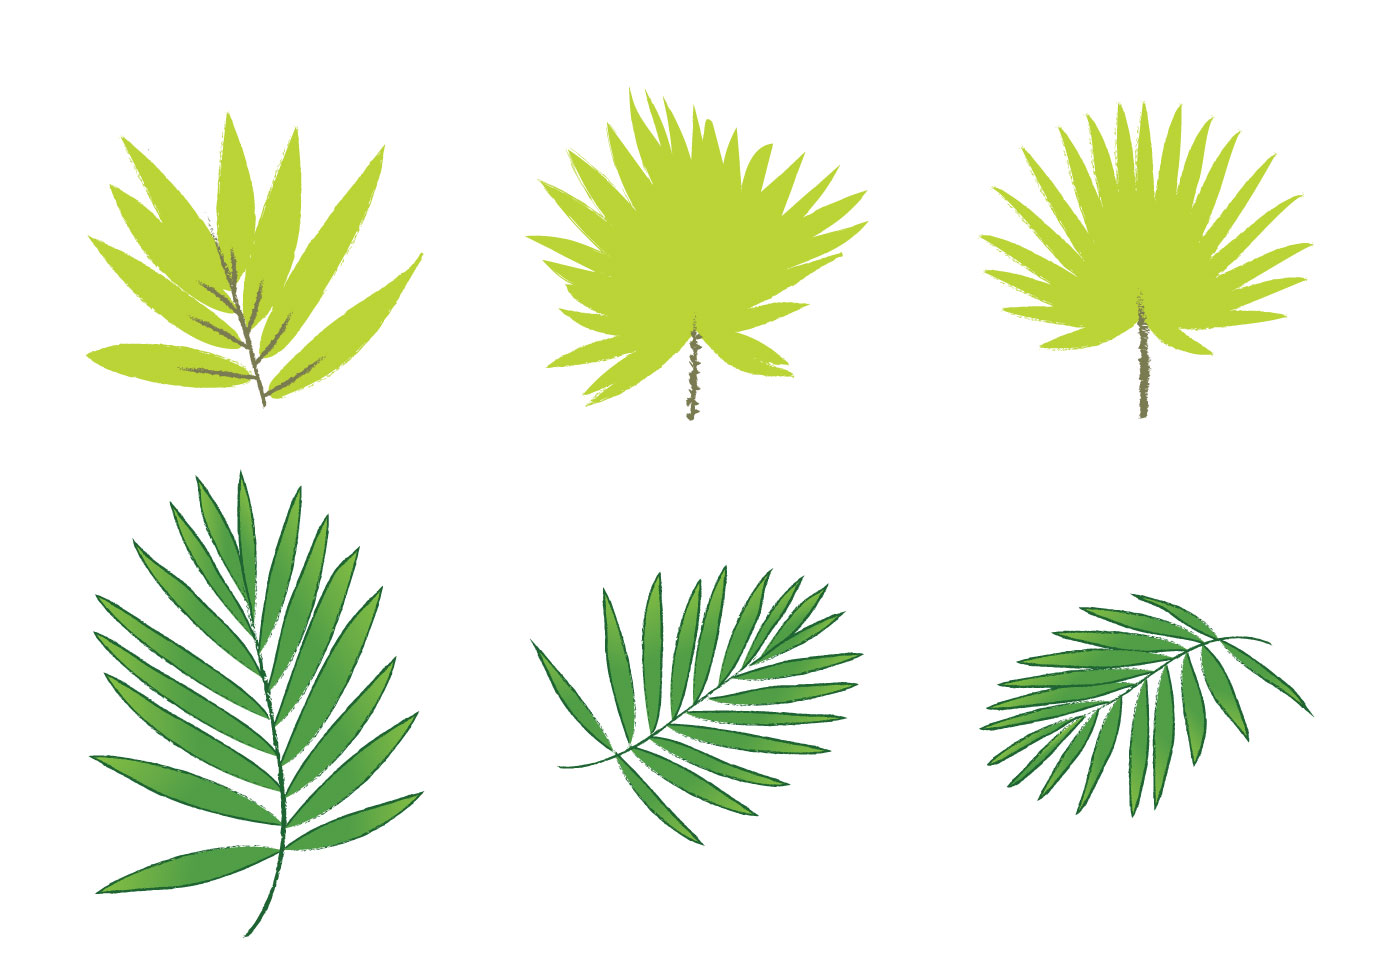 Free Palm Leaf Vectors - Download Free Vector Art, Stock ...